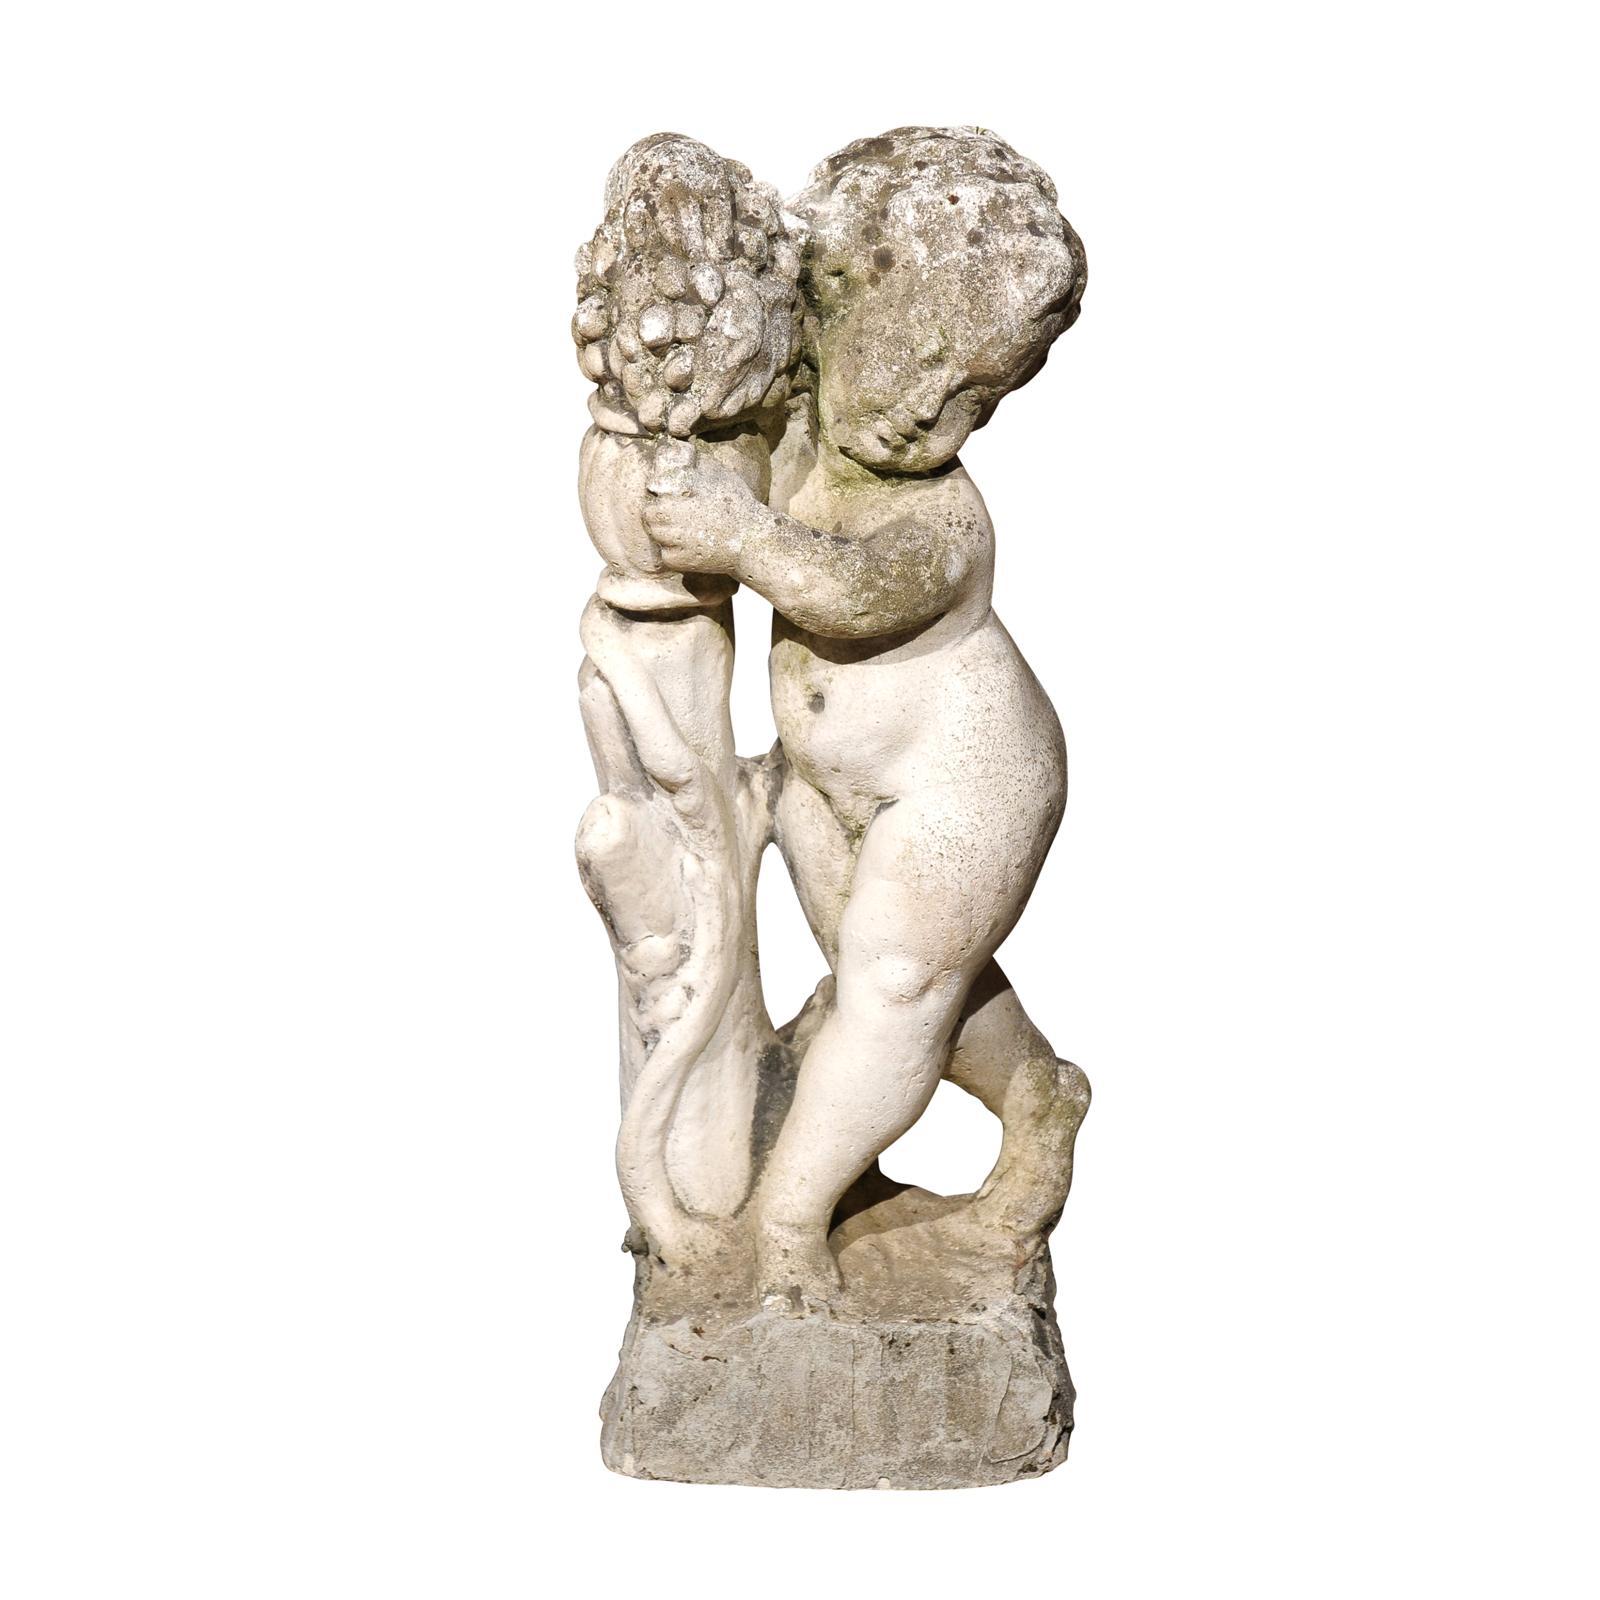 French Carved Stone Putti Sculpture with Grapes from the Mid 20th Century